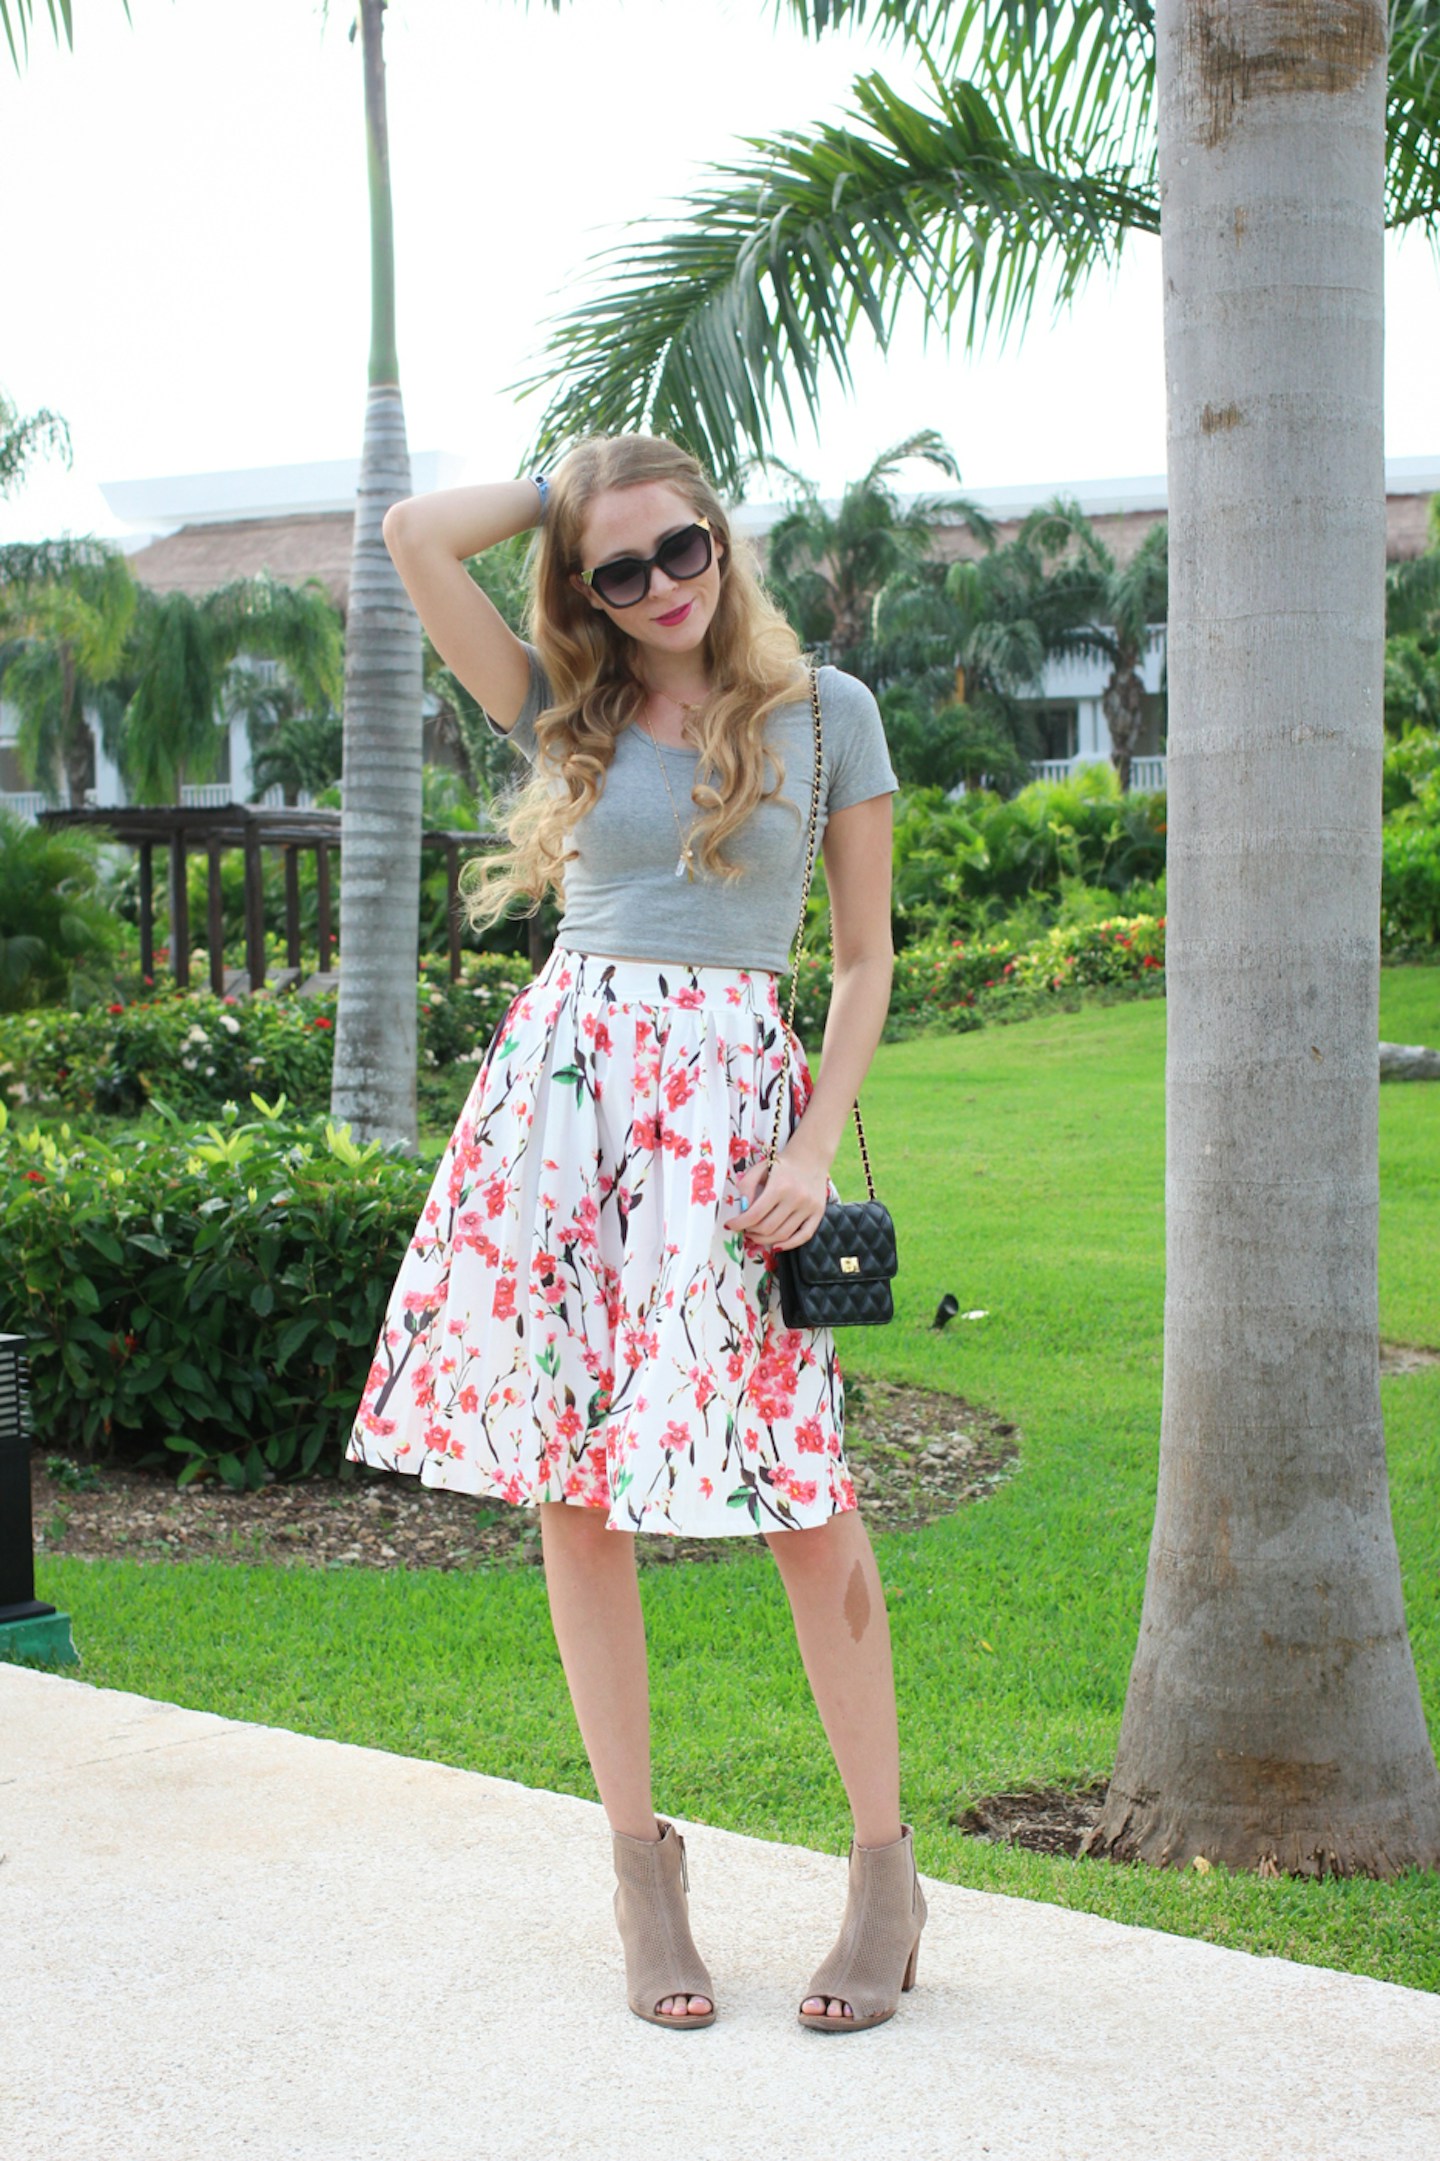 Tips for wearing printed midi skirts